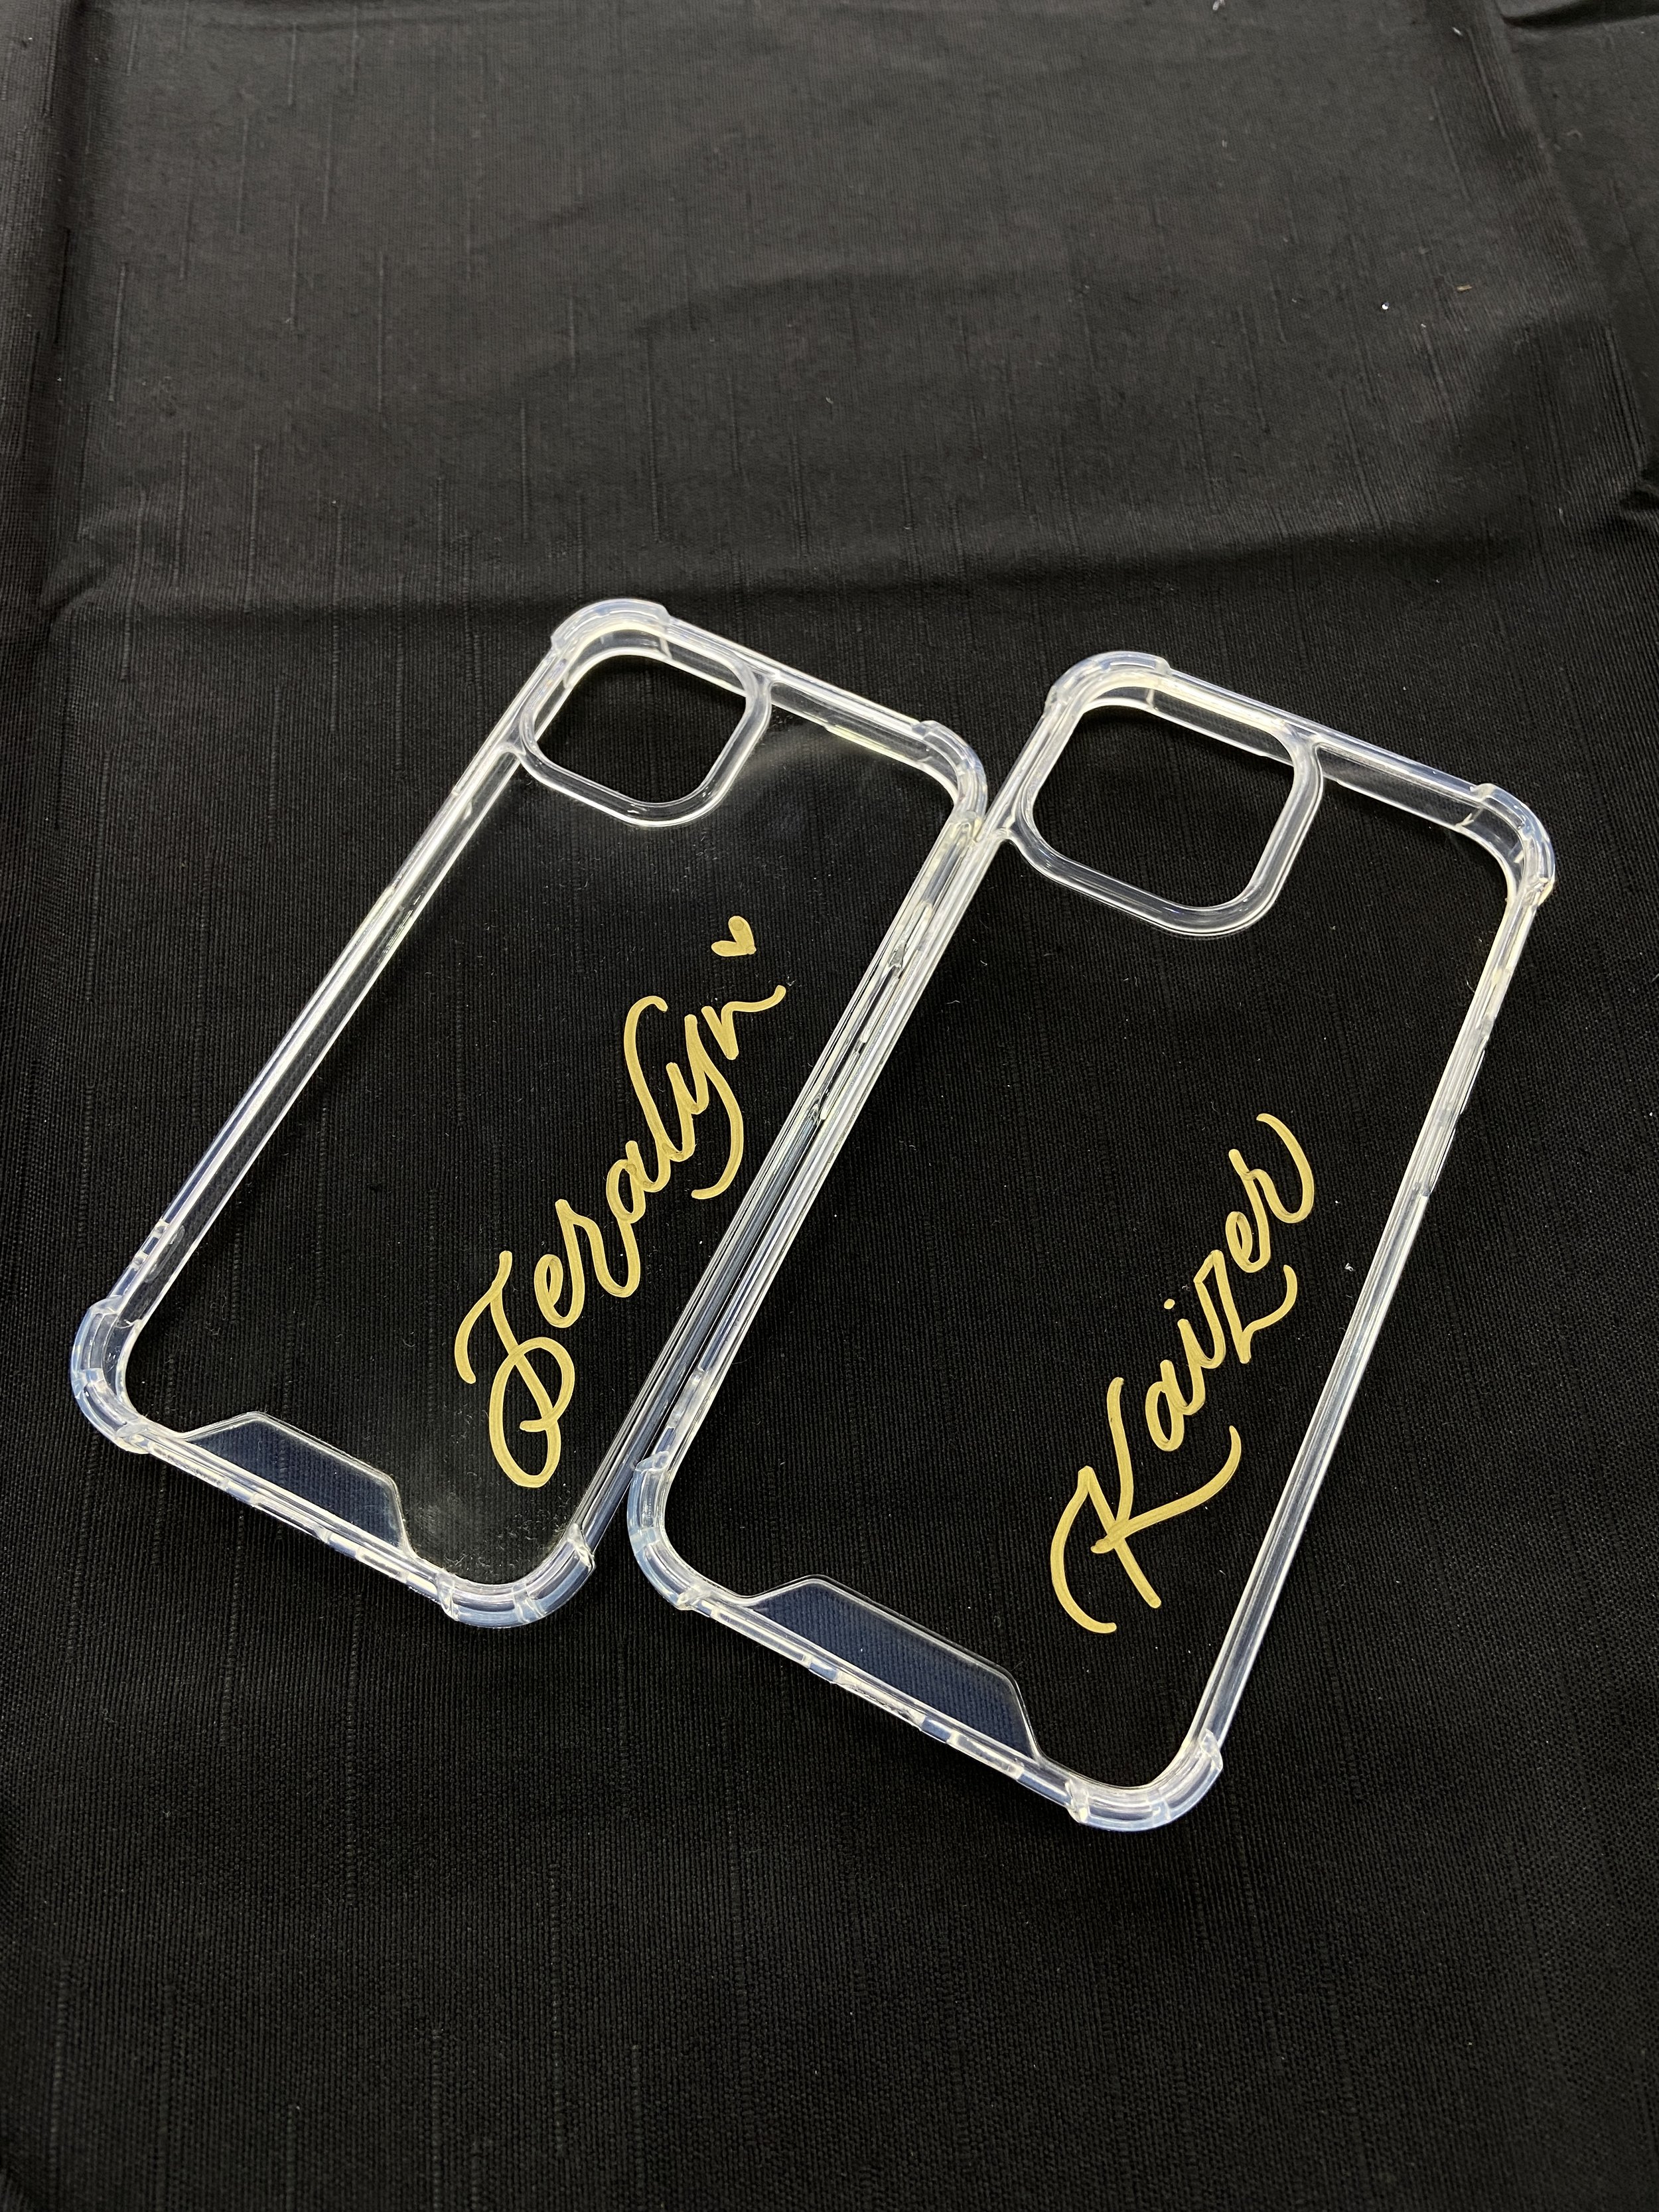 M1 Phone Cover Calligraphy & Lettering Customisation Live Event 10.JPG